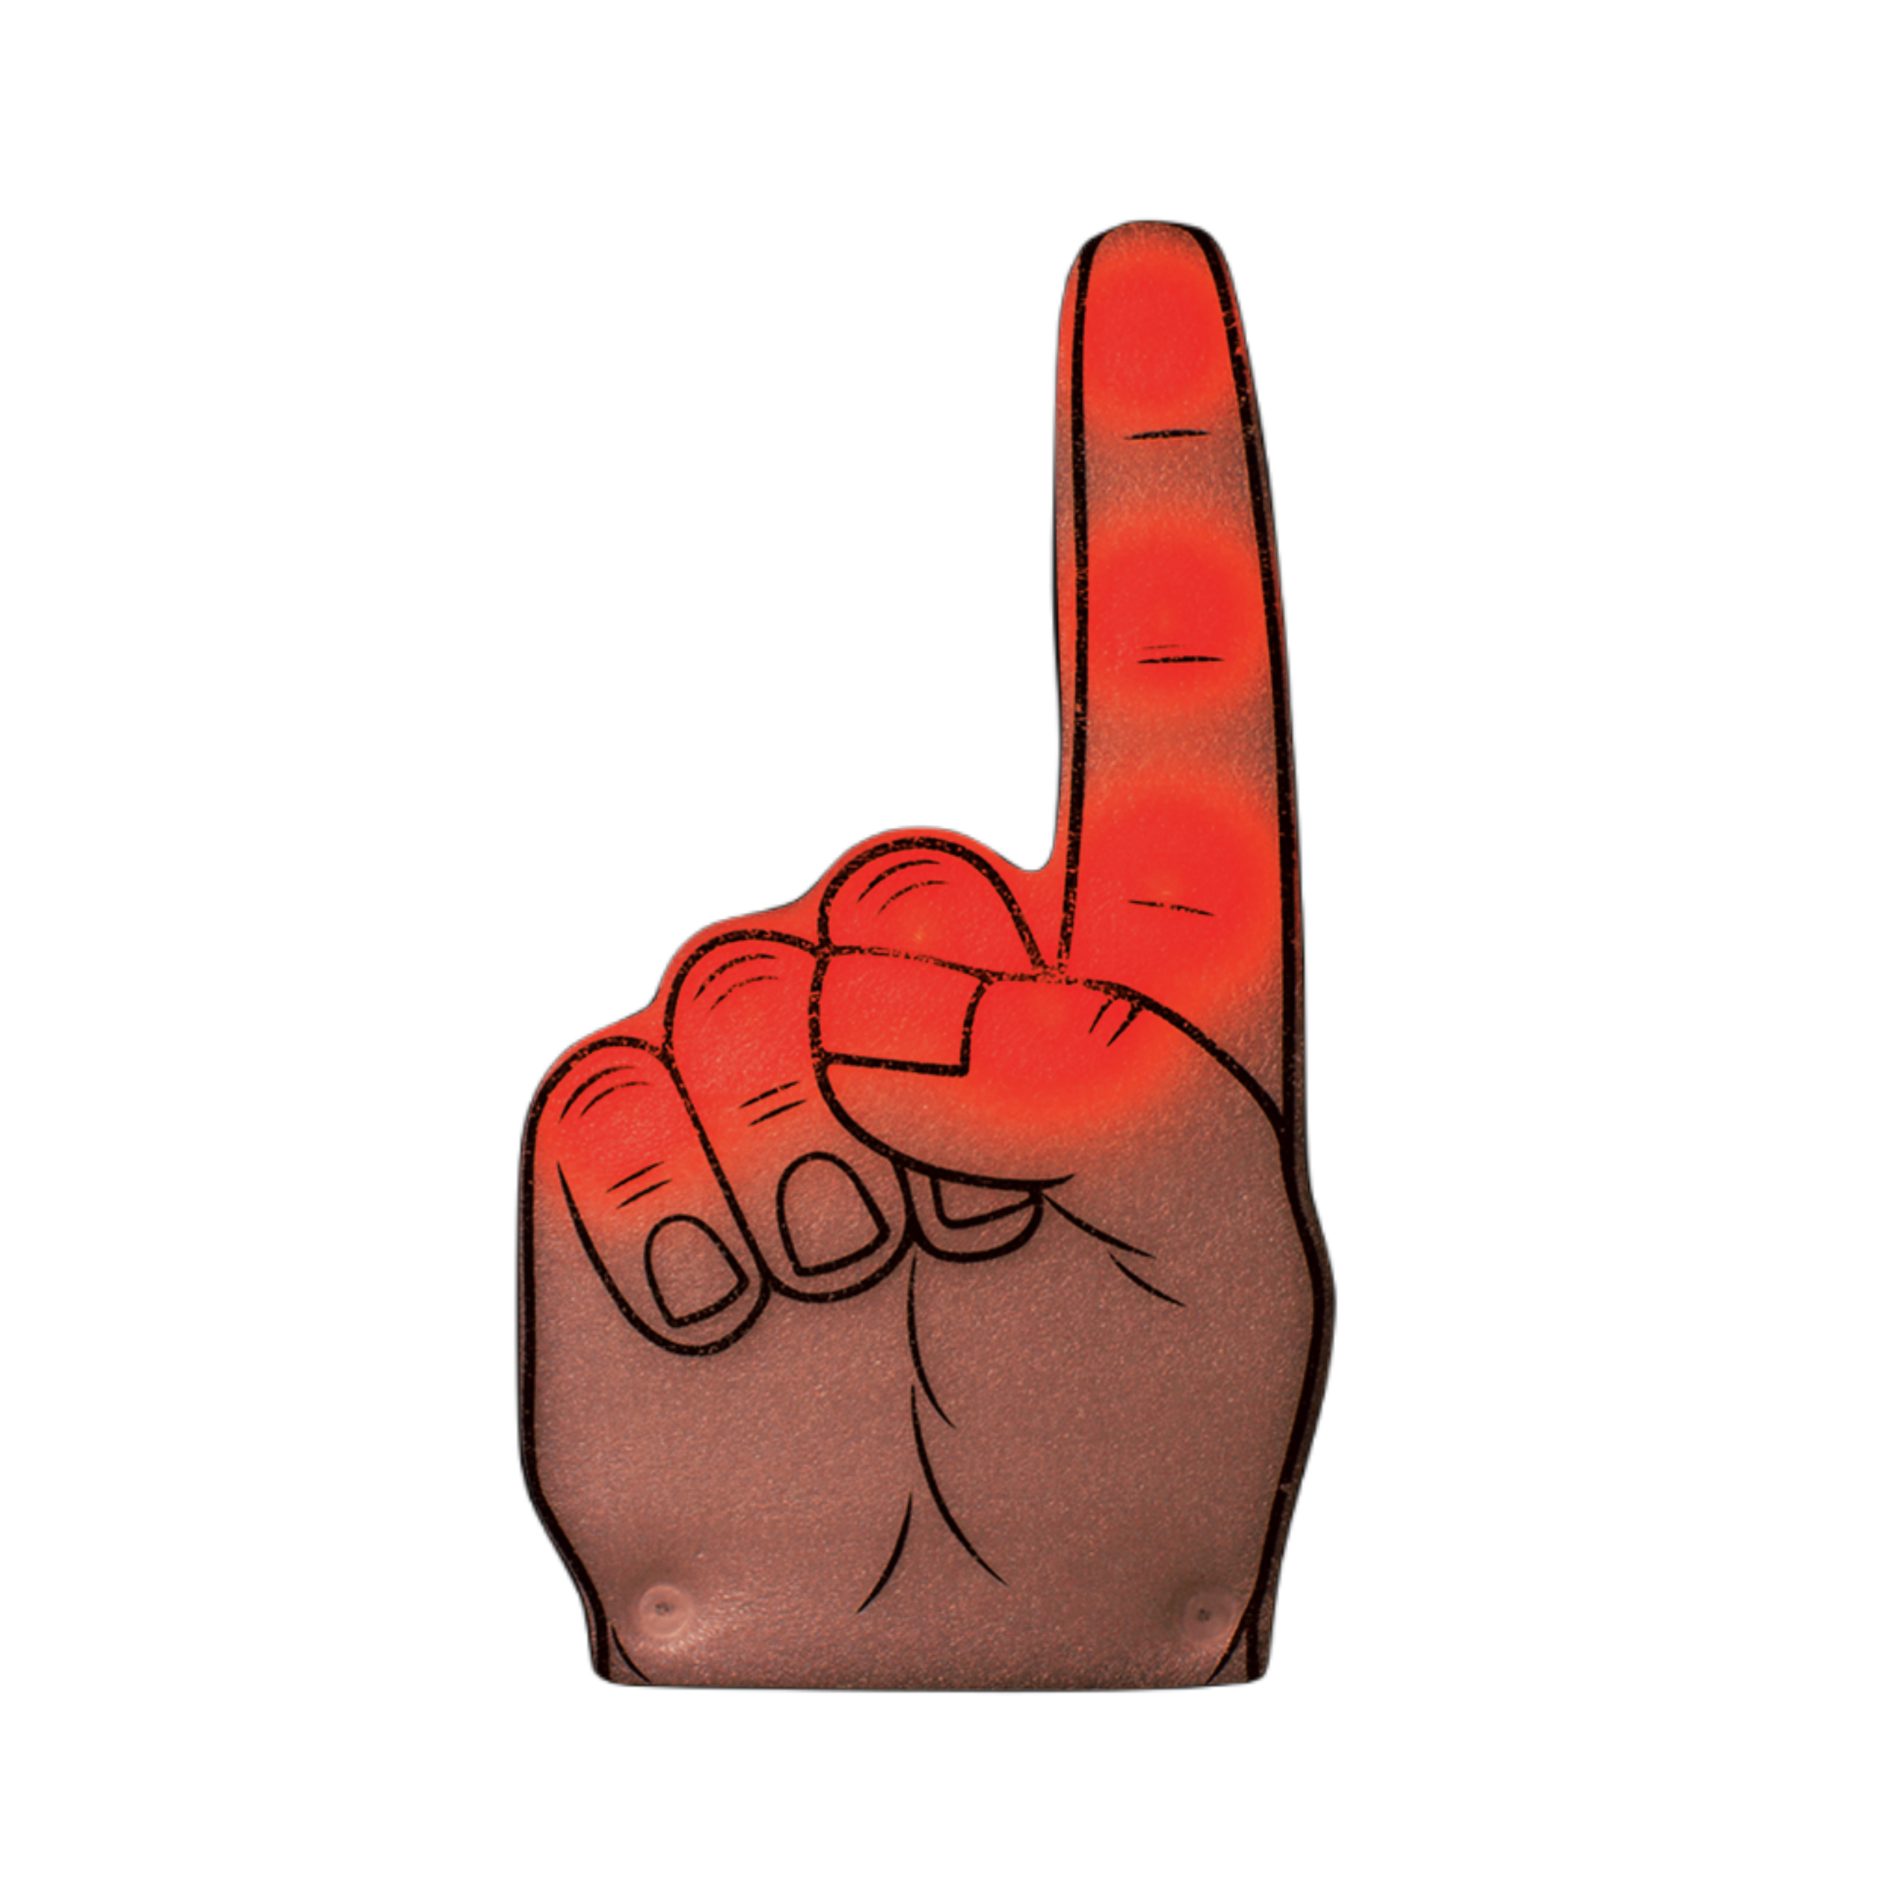 Number One Foam Light Up Finger Red All Products 3